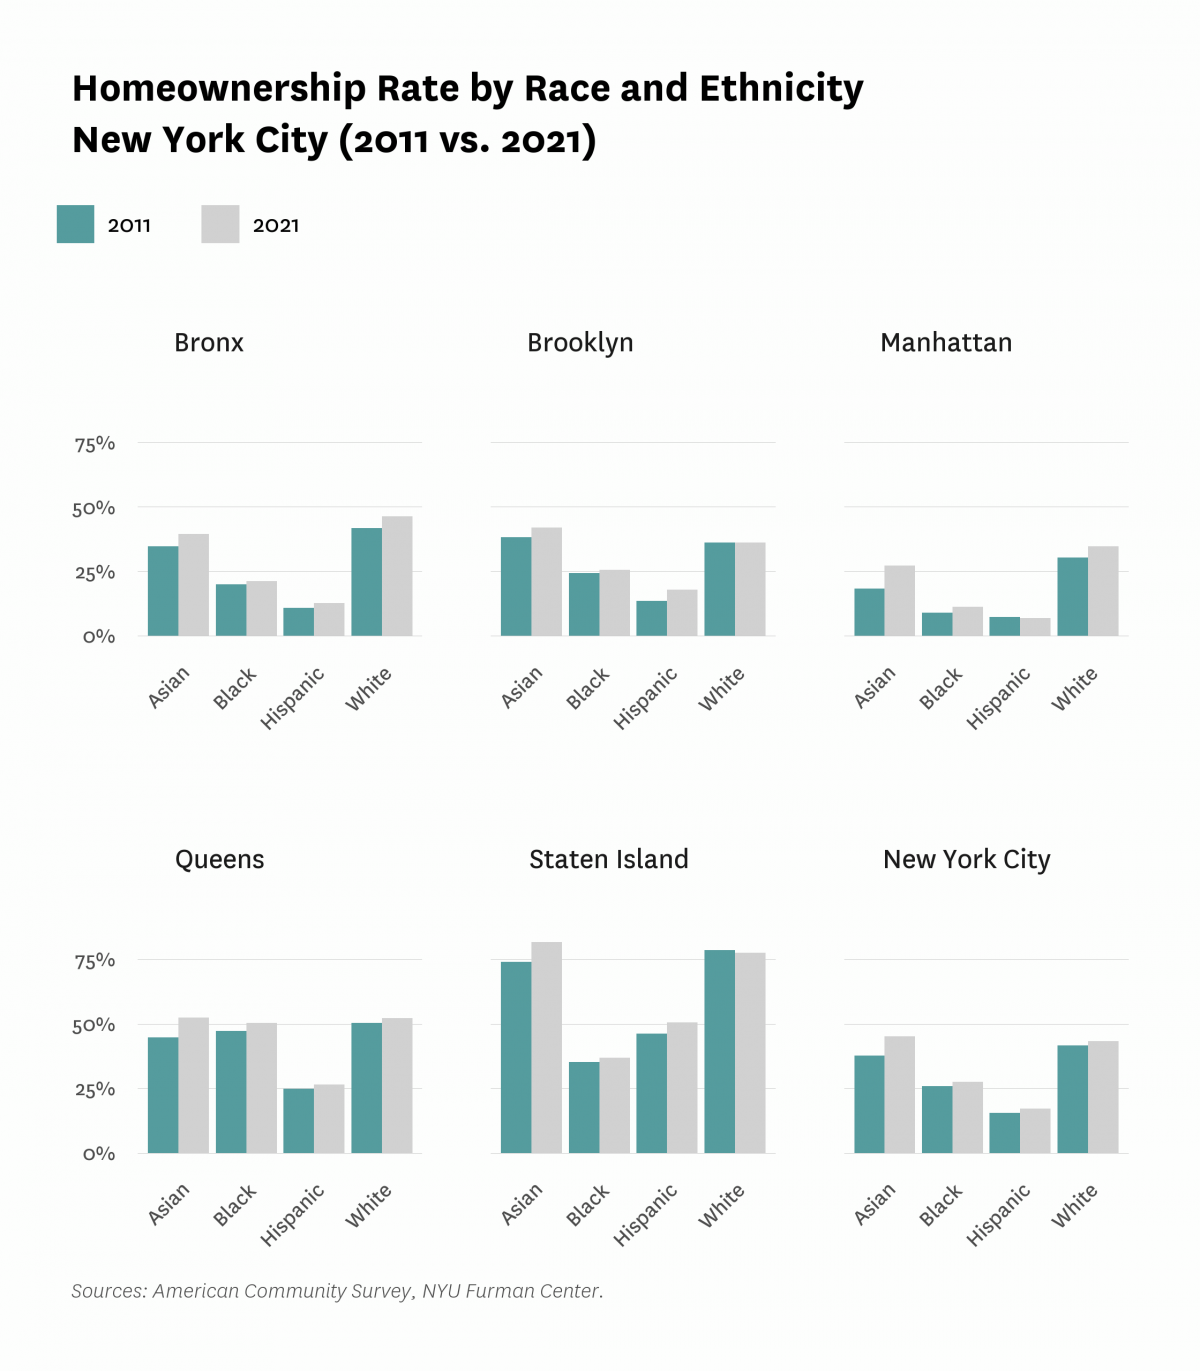 Bar graphs comparing the homeownership rate by race and ethnicity within each borough of New York City in 2011 versus 2021.